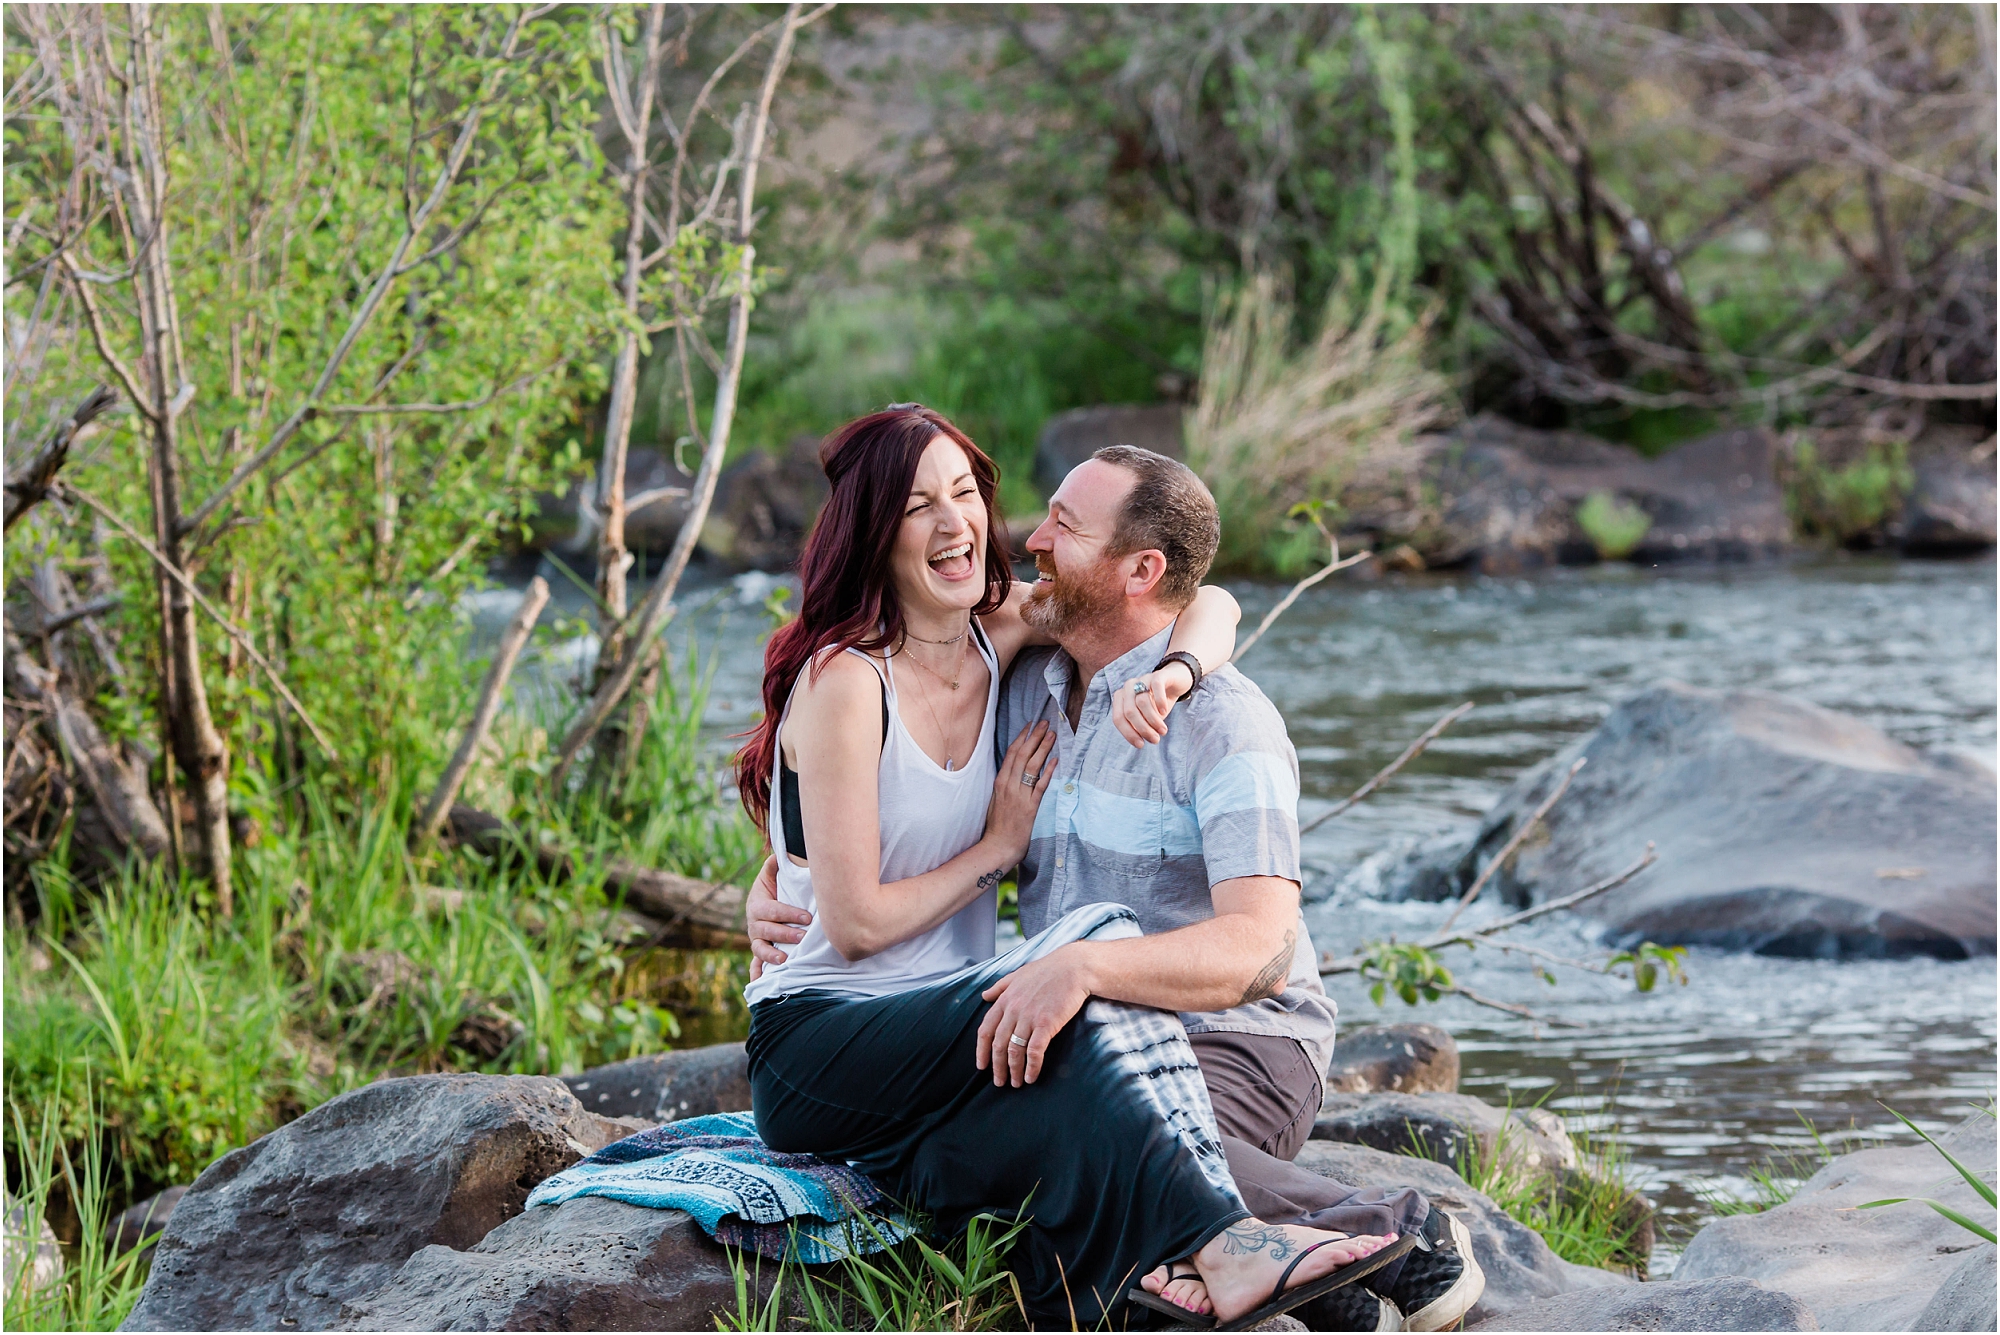 A couple laughs during their sunset engagement session along the river in Bend, OR. | Erica Swantek Photography